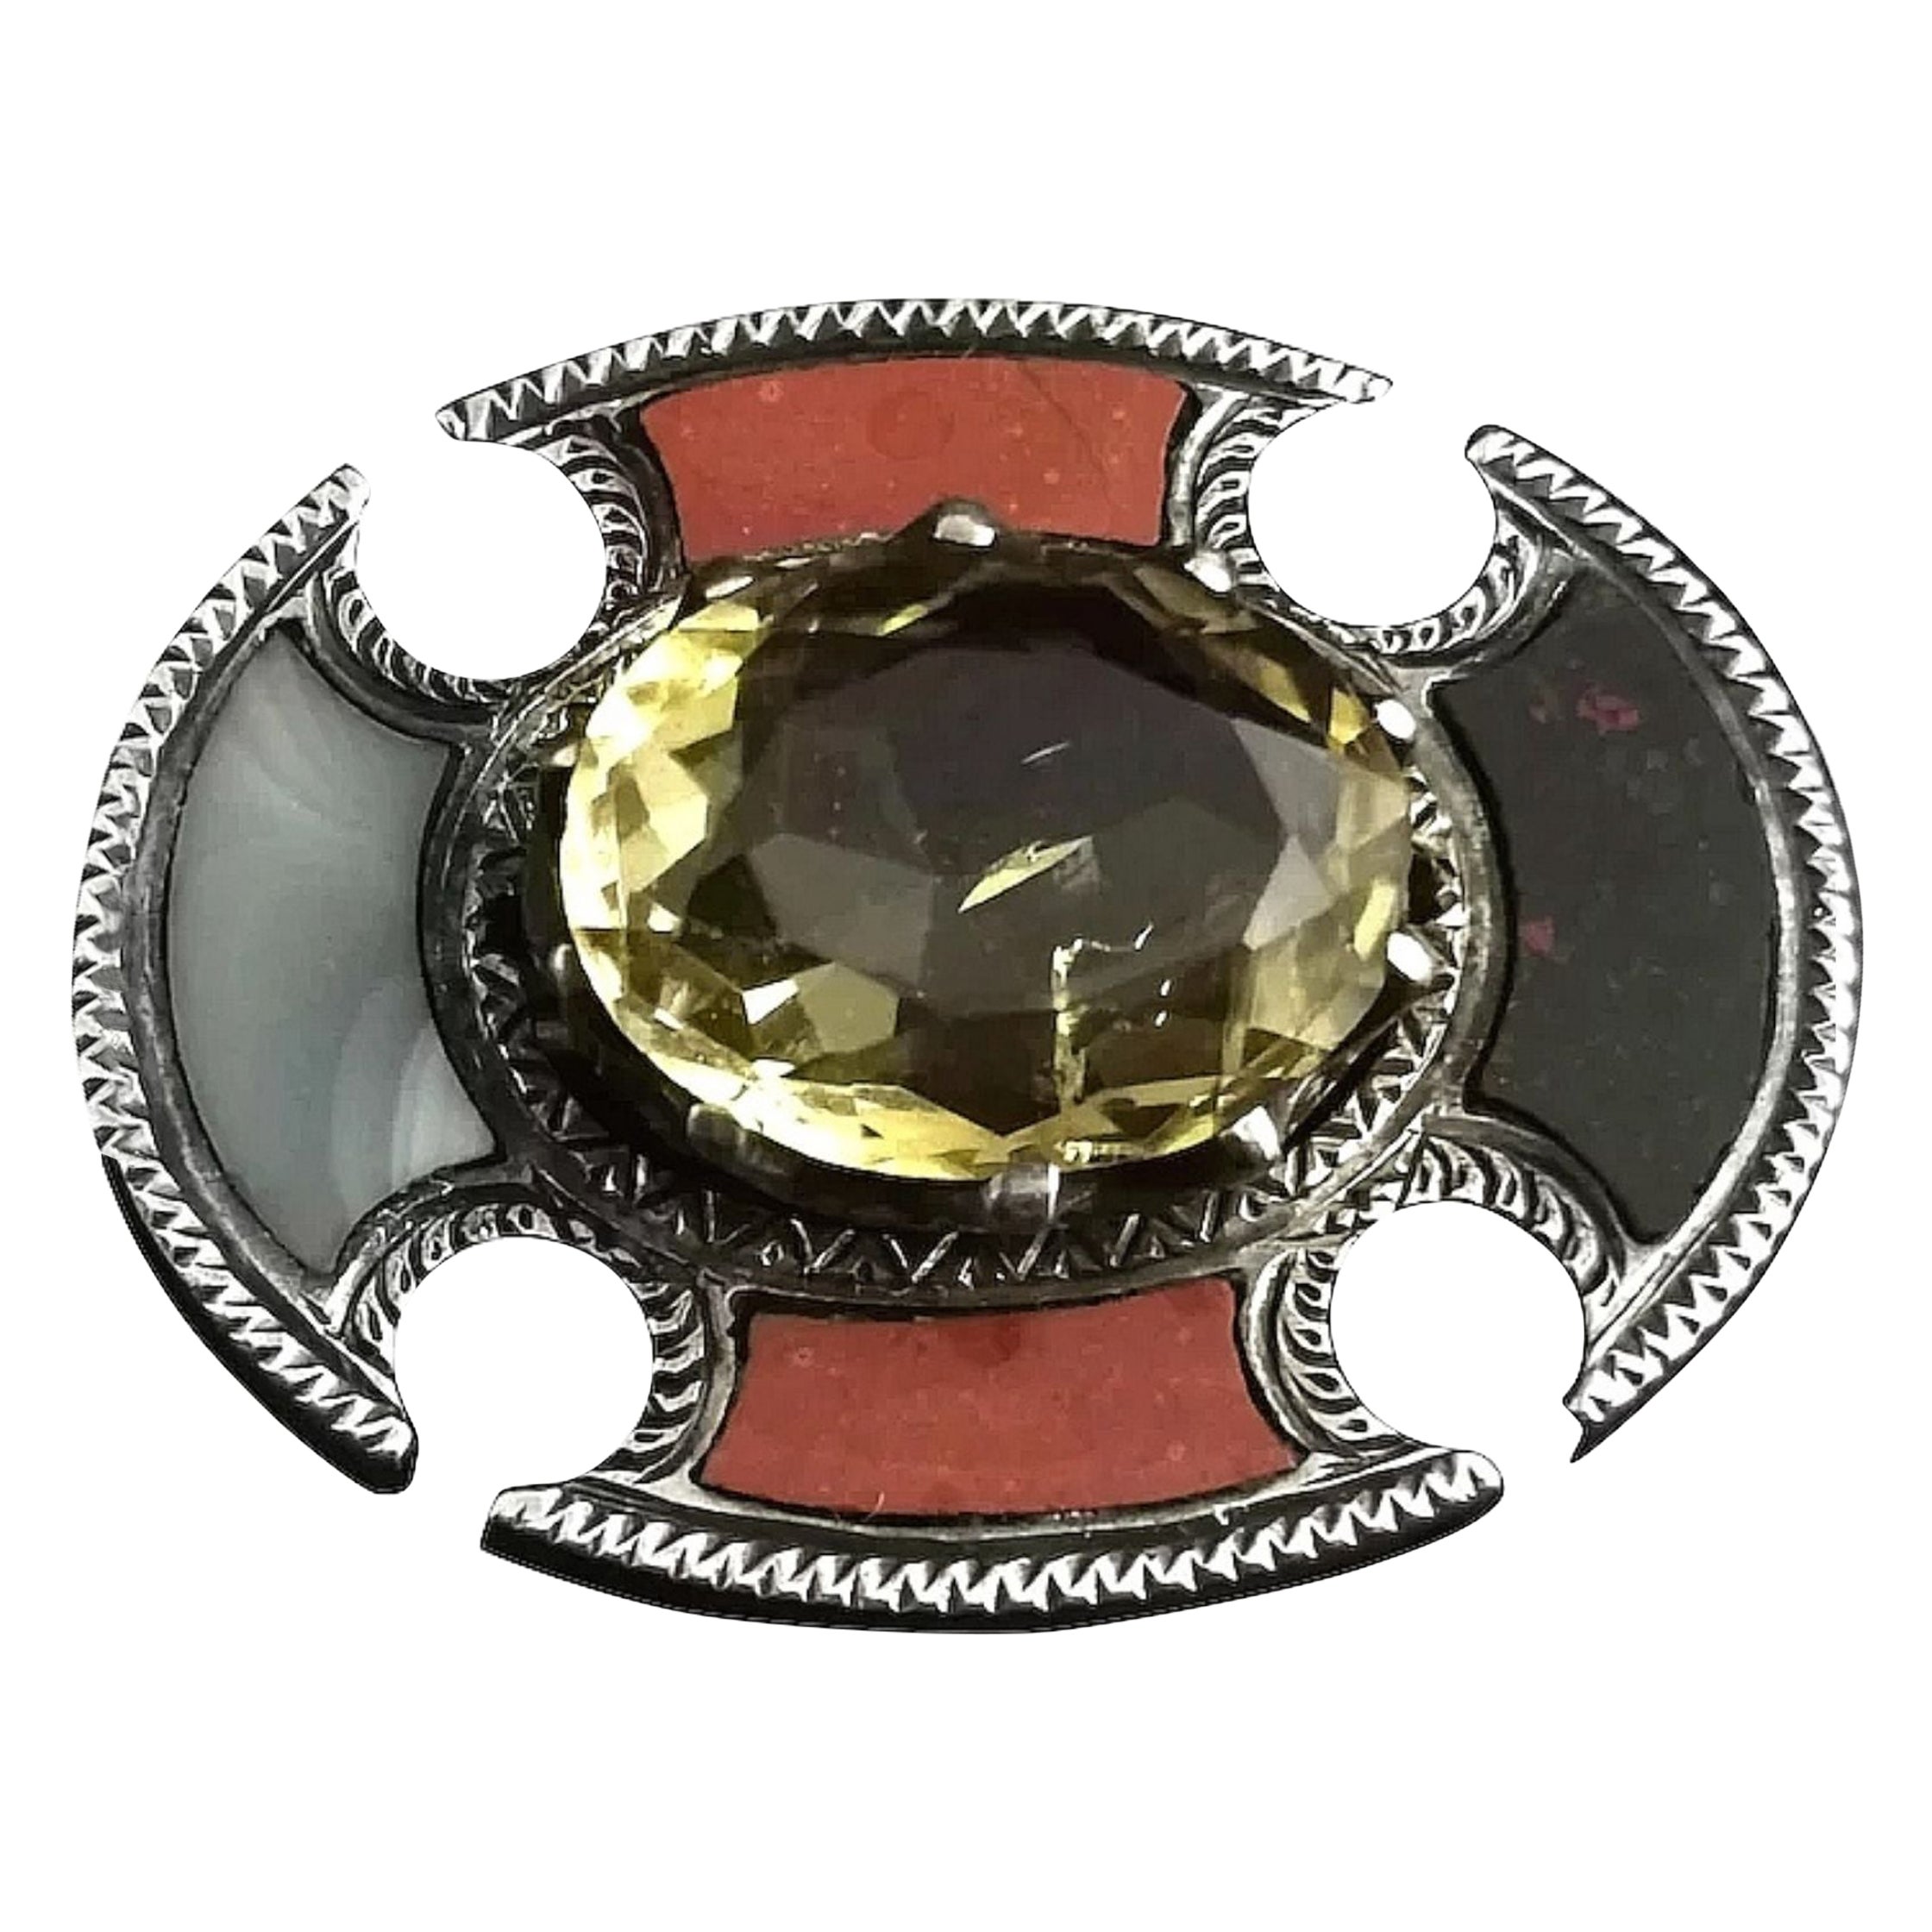 Antique Scottish Agate and Citrine Brooch, Sterling Silver